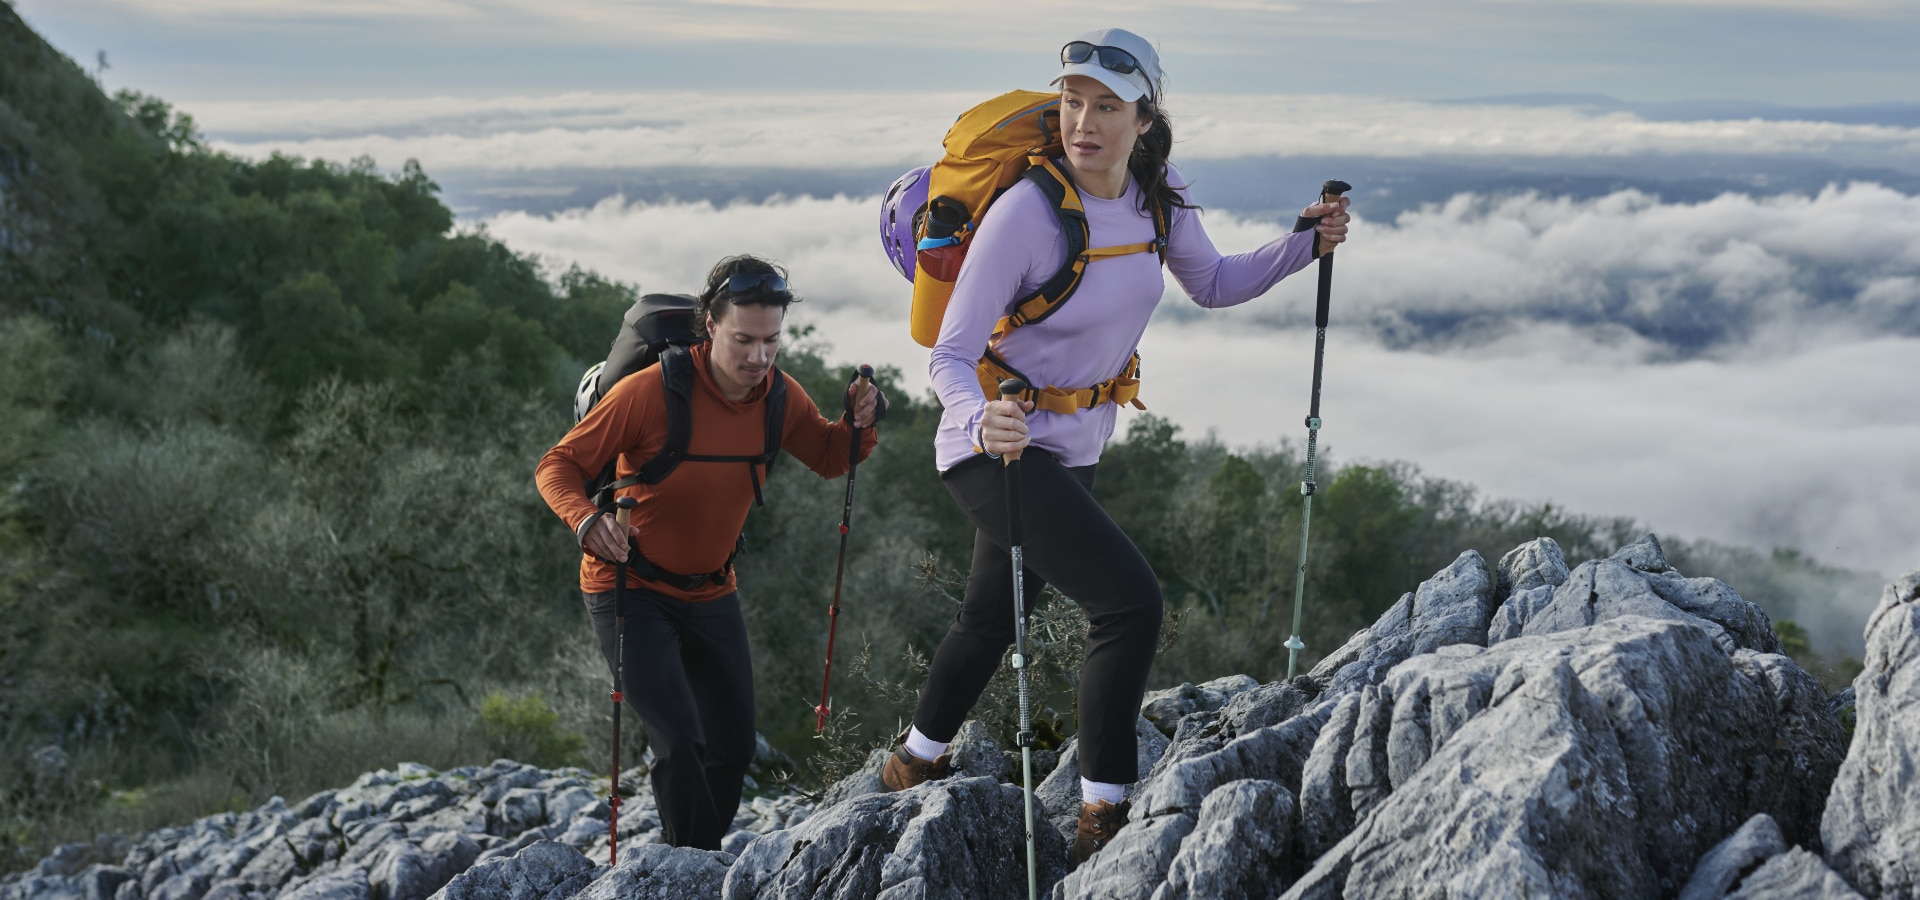 Shop the Get Outdoors Event up to 50% off*